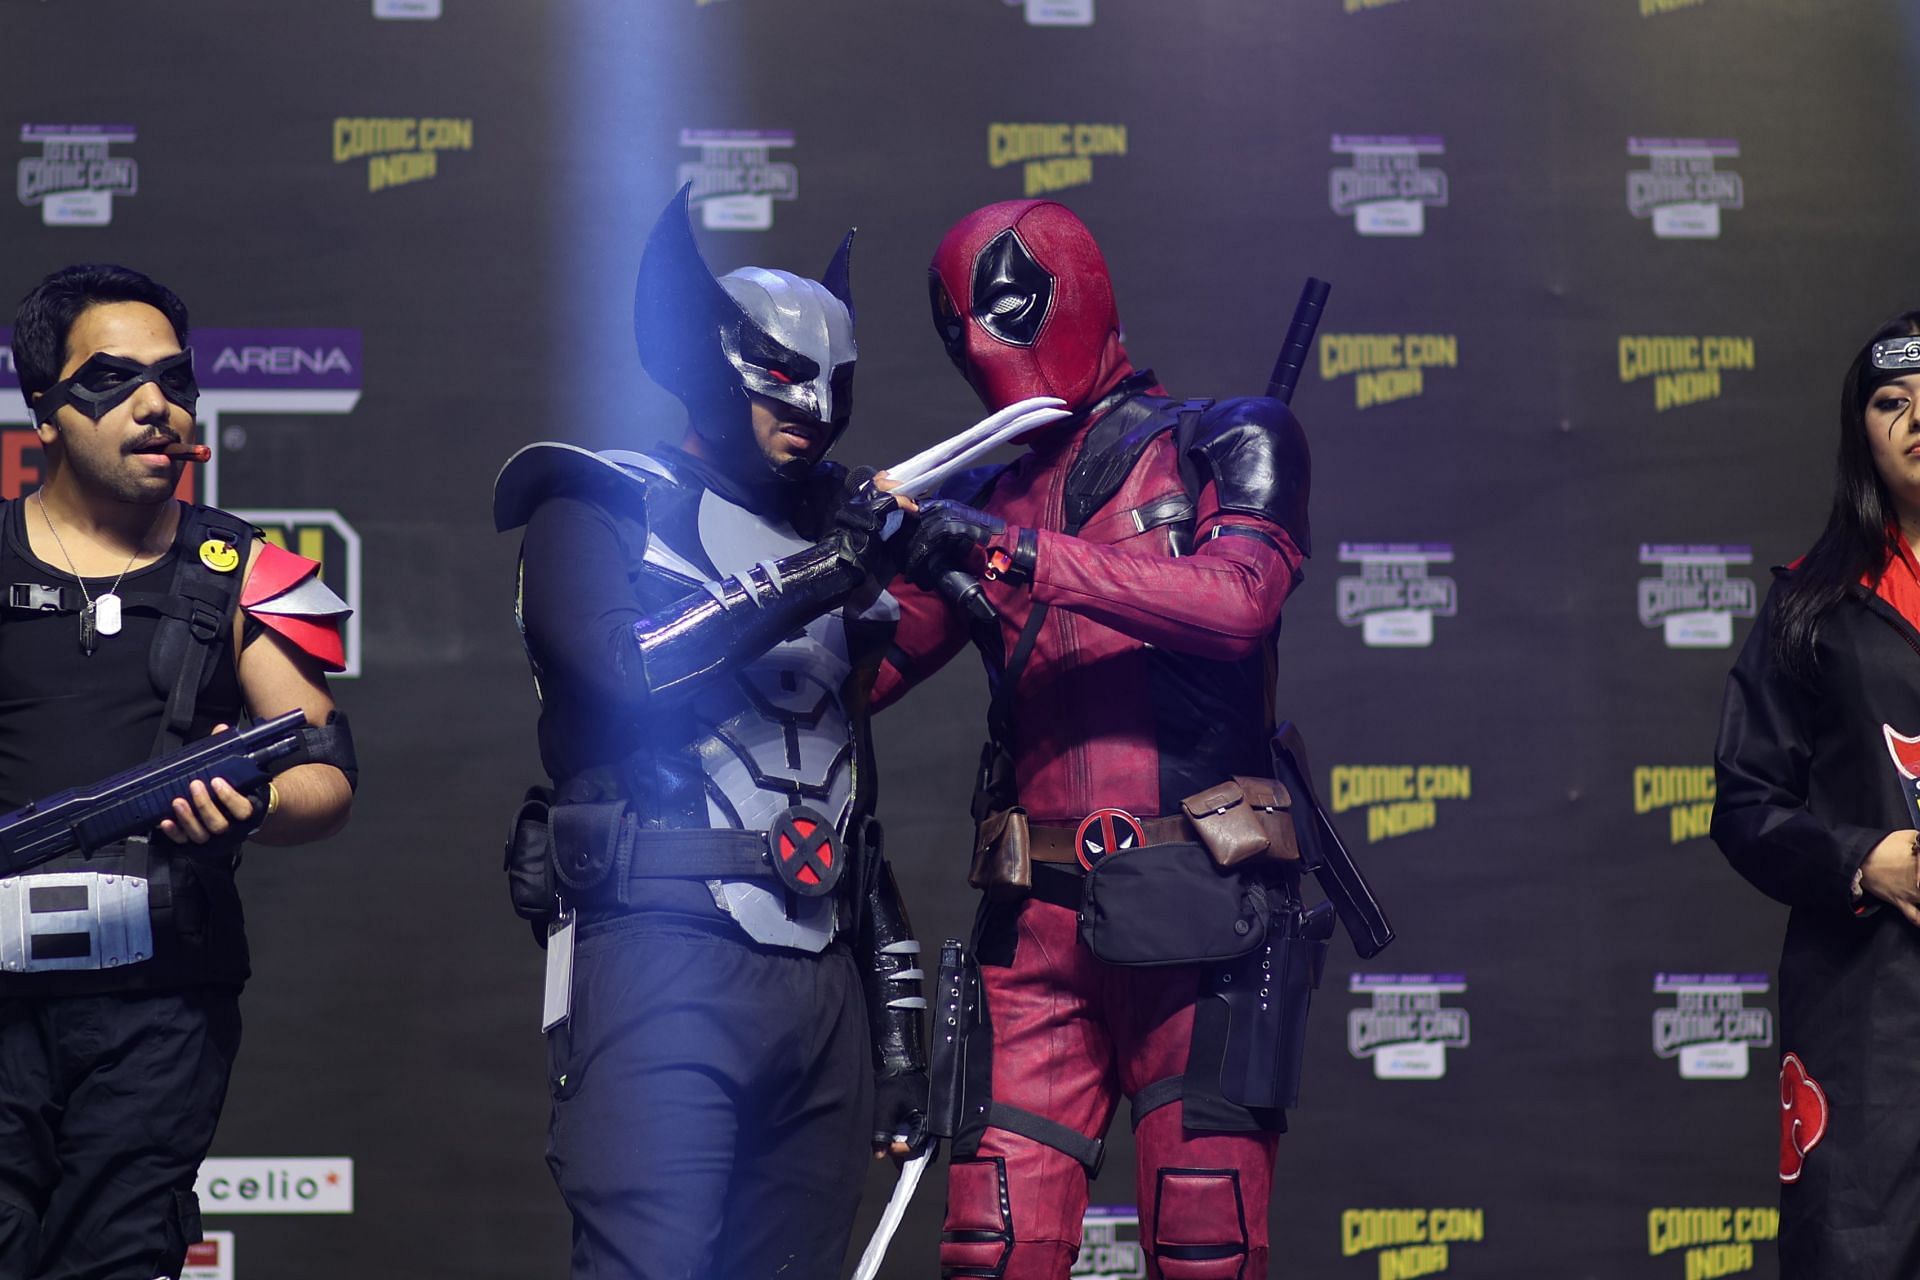 Cosplayers at the competition at Delhi Comic Con 2022 (Image via event&#039;s official Instagram)